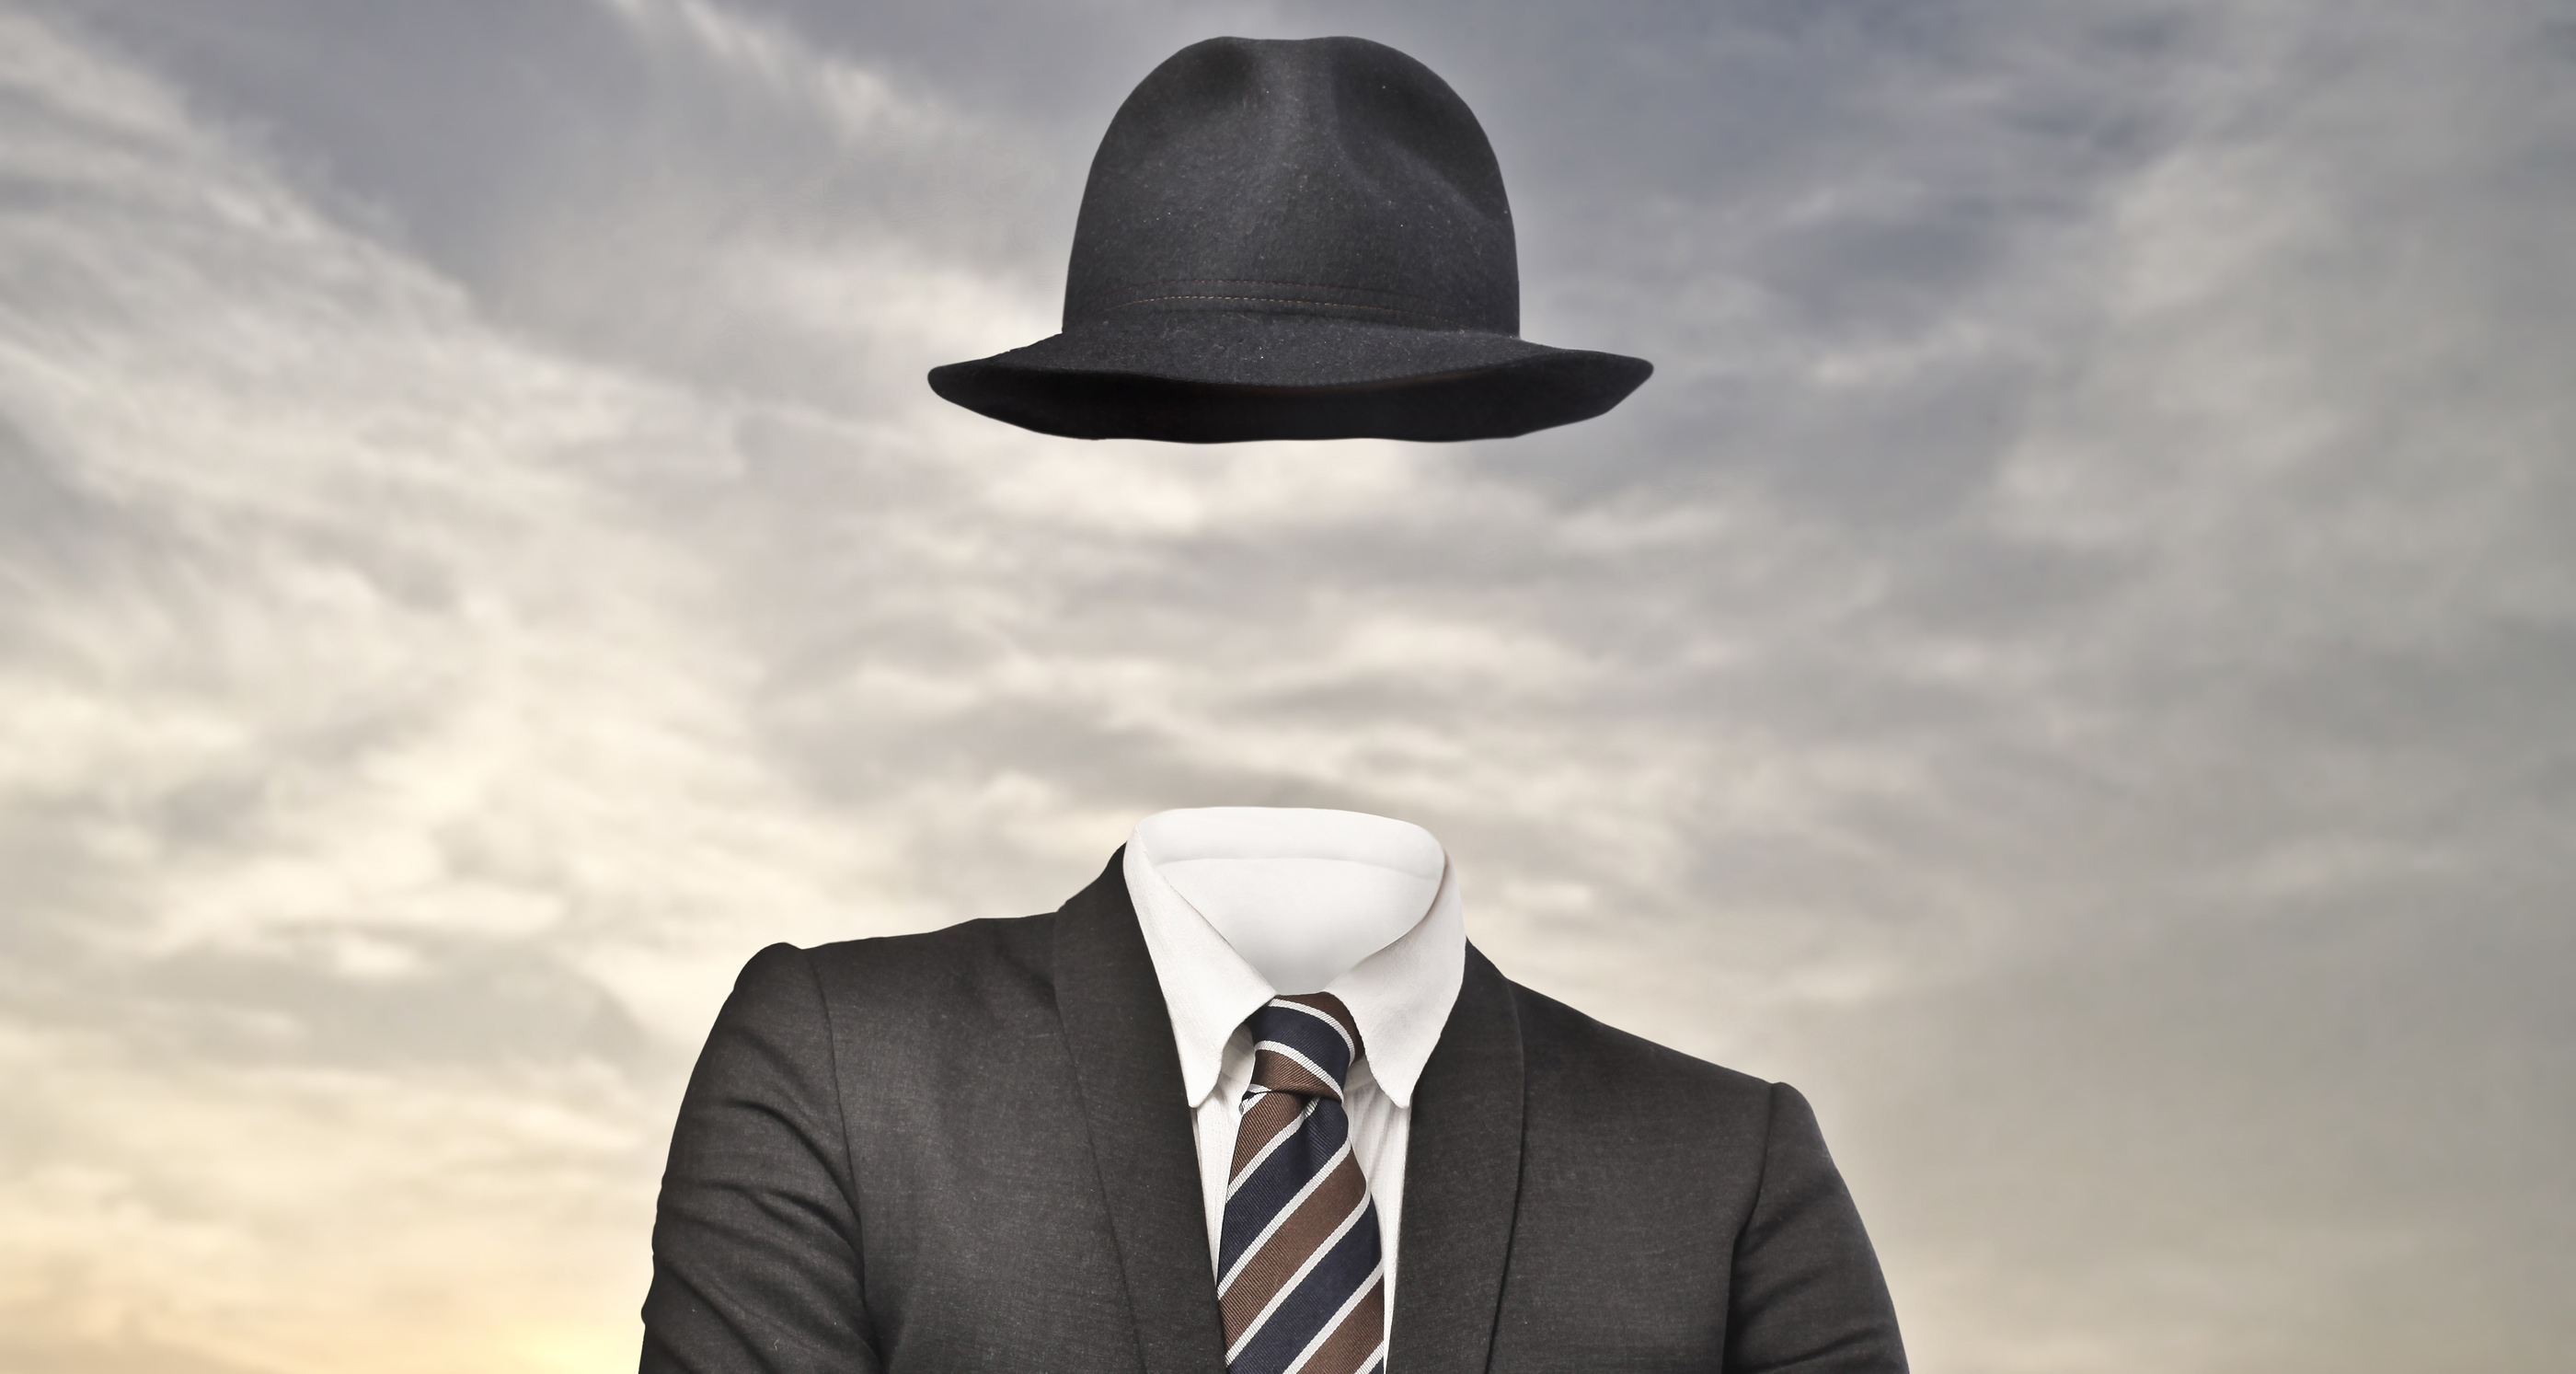 invisible businessman with hat